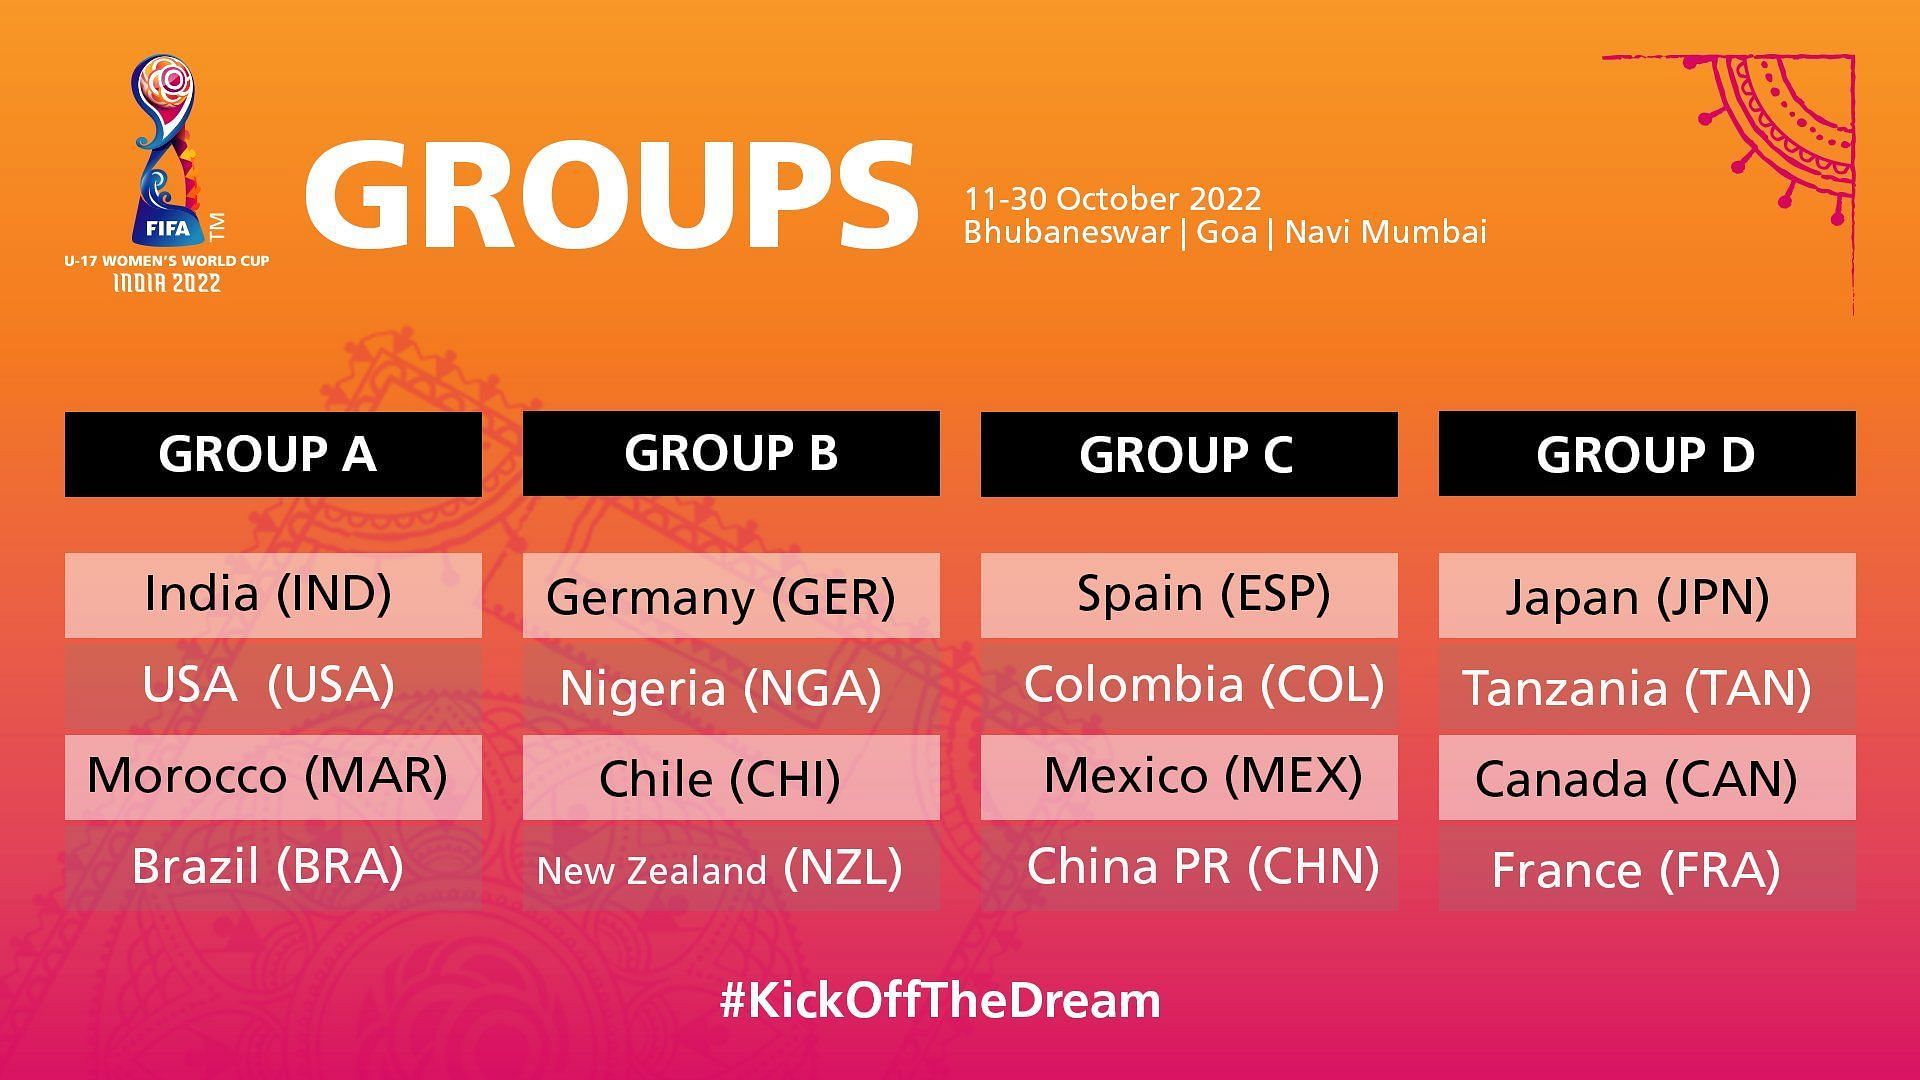 India has been drawn into Group A alongside Brazil, USA, and Morocco. (Image Courtesy: Twitter/IndianFootball)